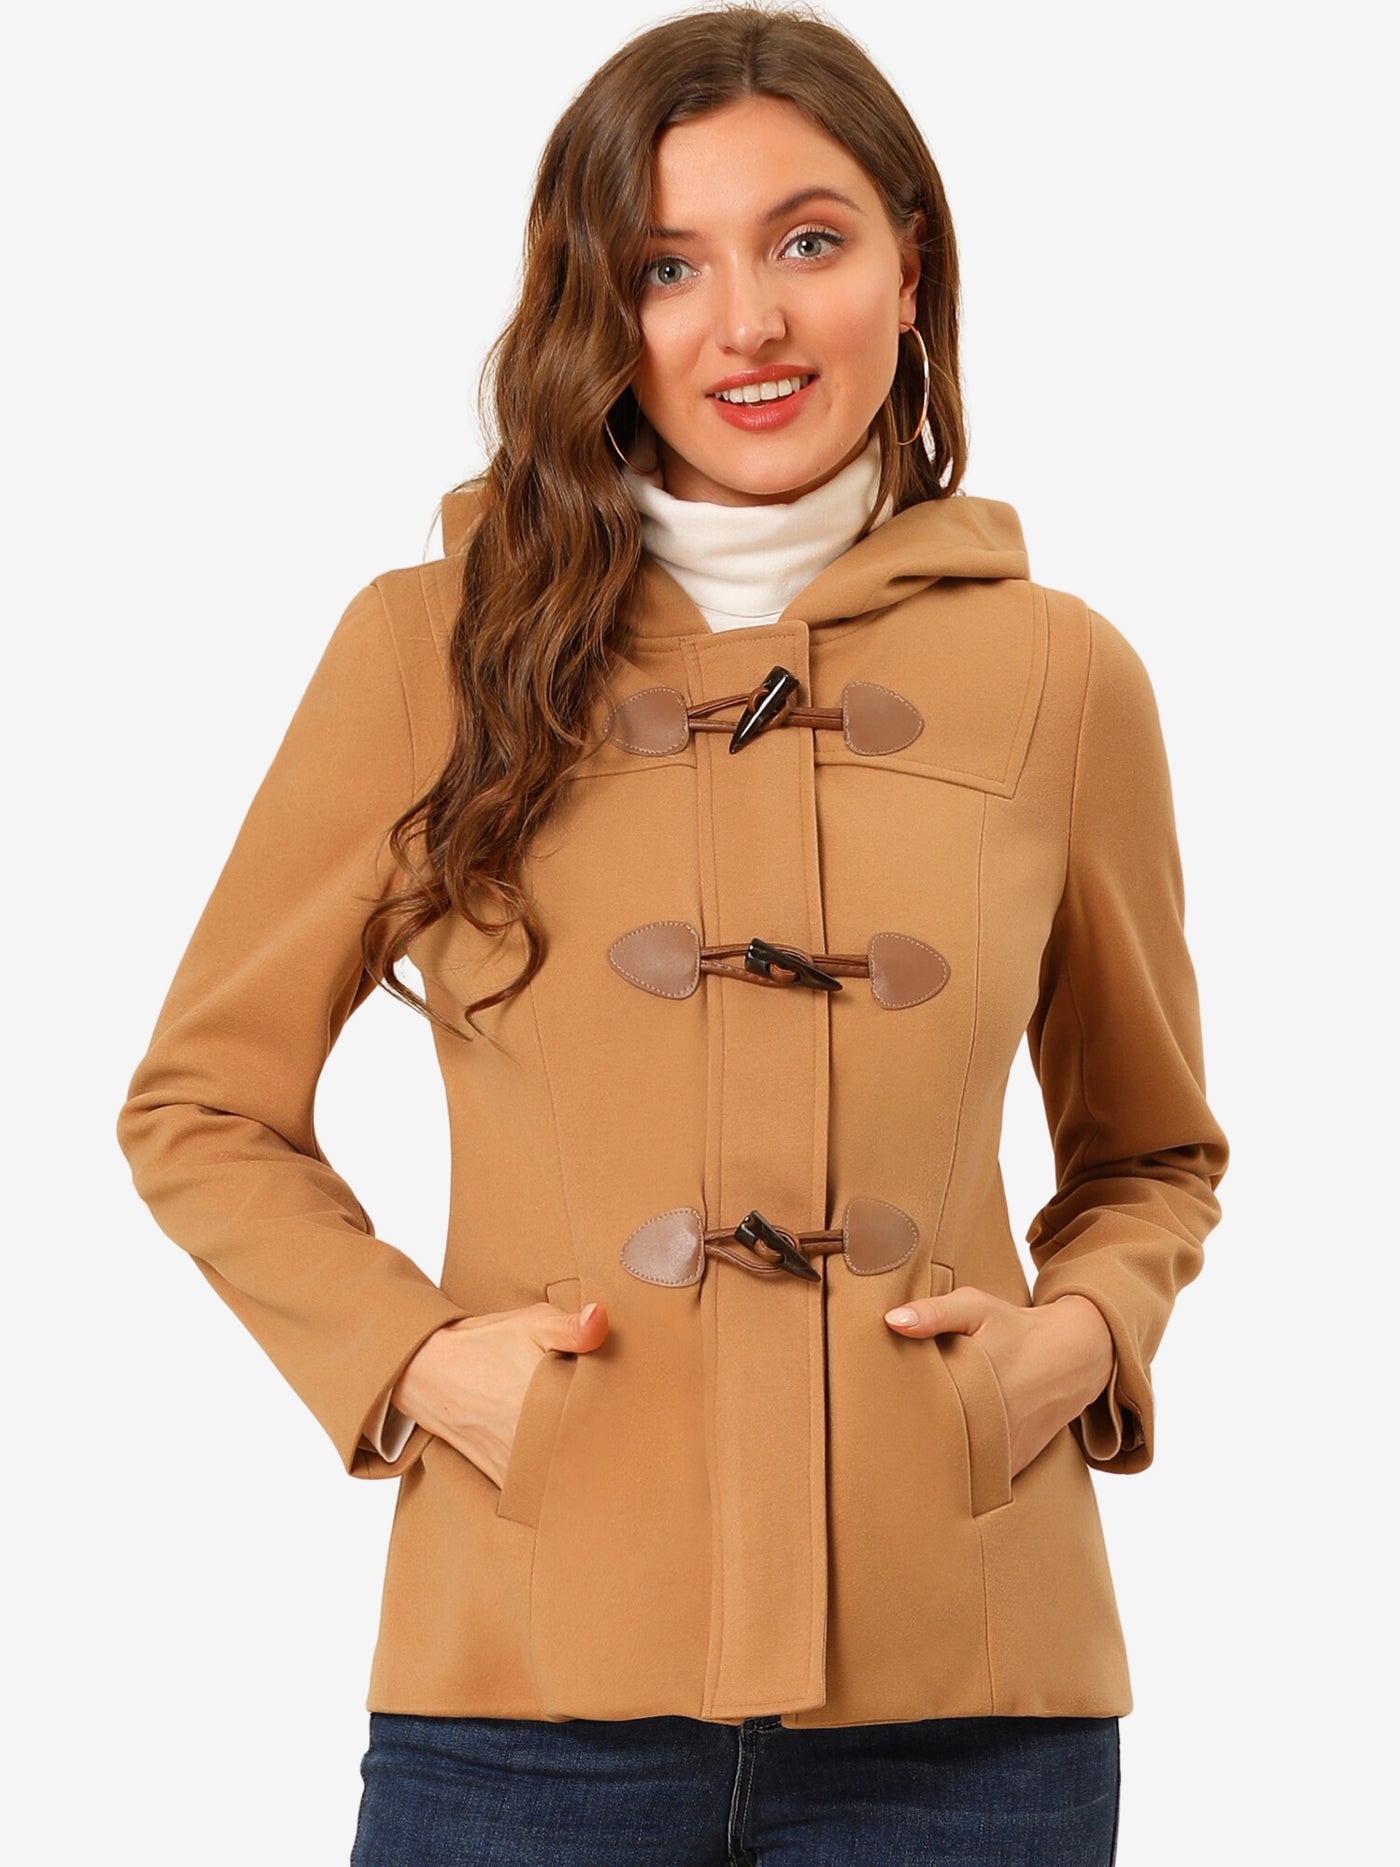 Allegra K Casual Winter Outwear Hooded Button Toggle Pea Coat